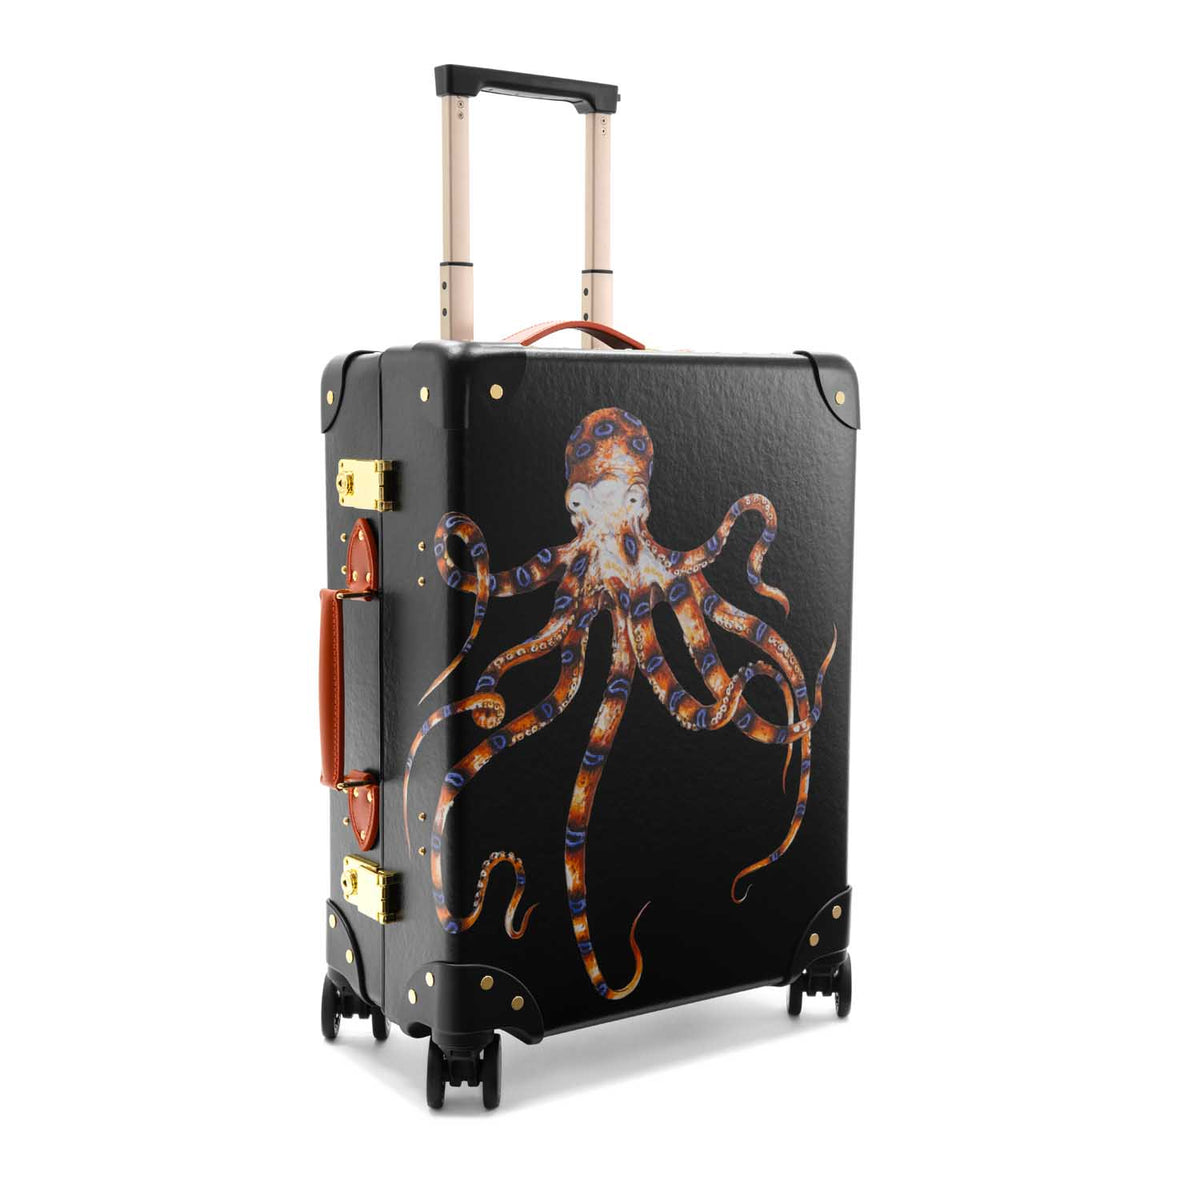 James Bond Carry-On Trolley Case - Octopussy Edition - By Globe-Trotter